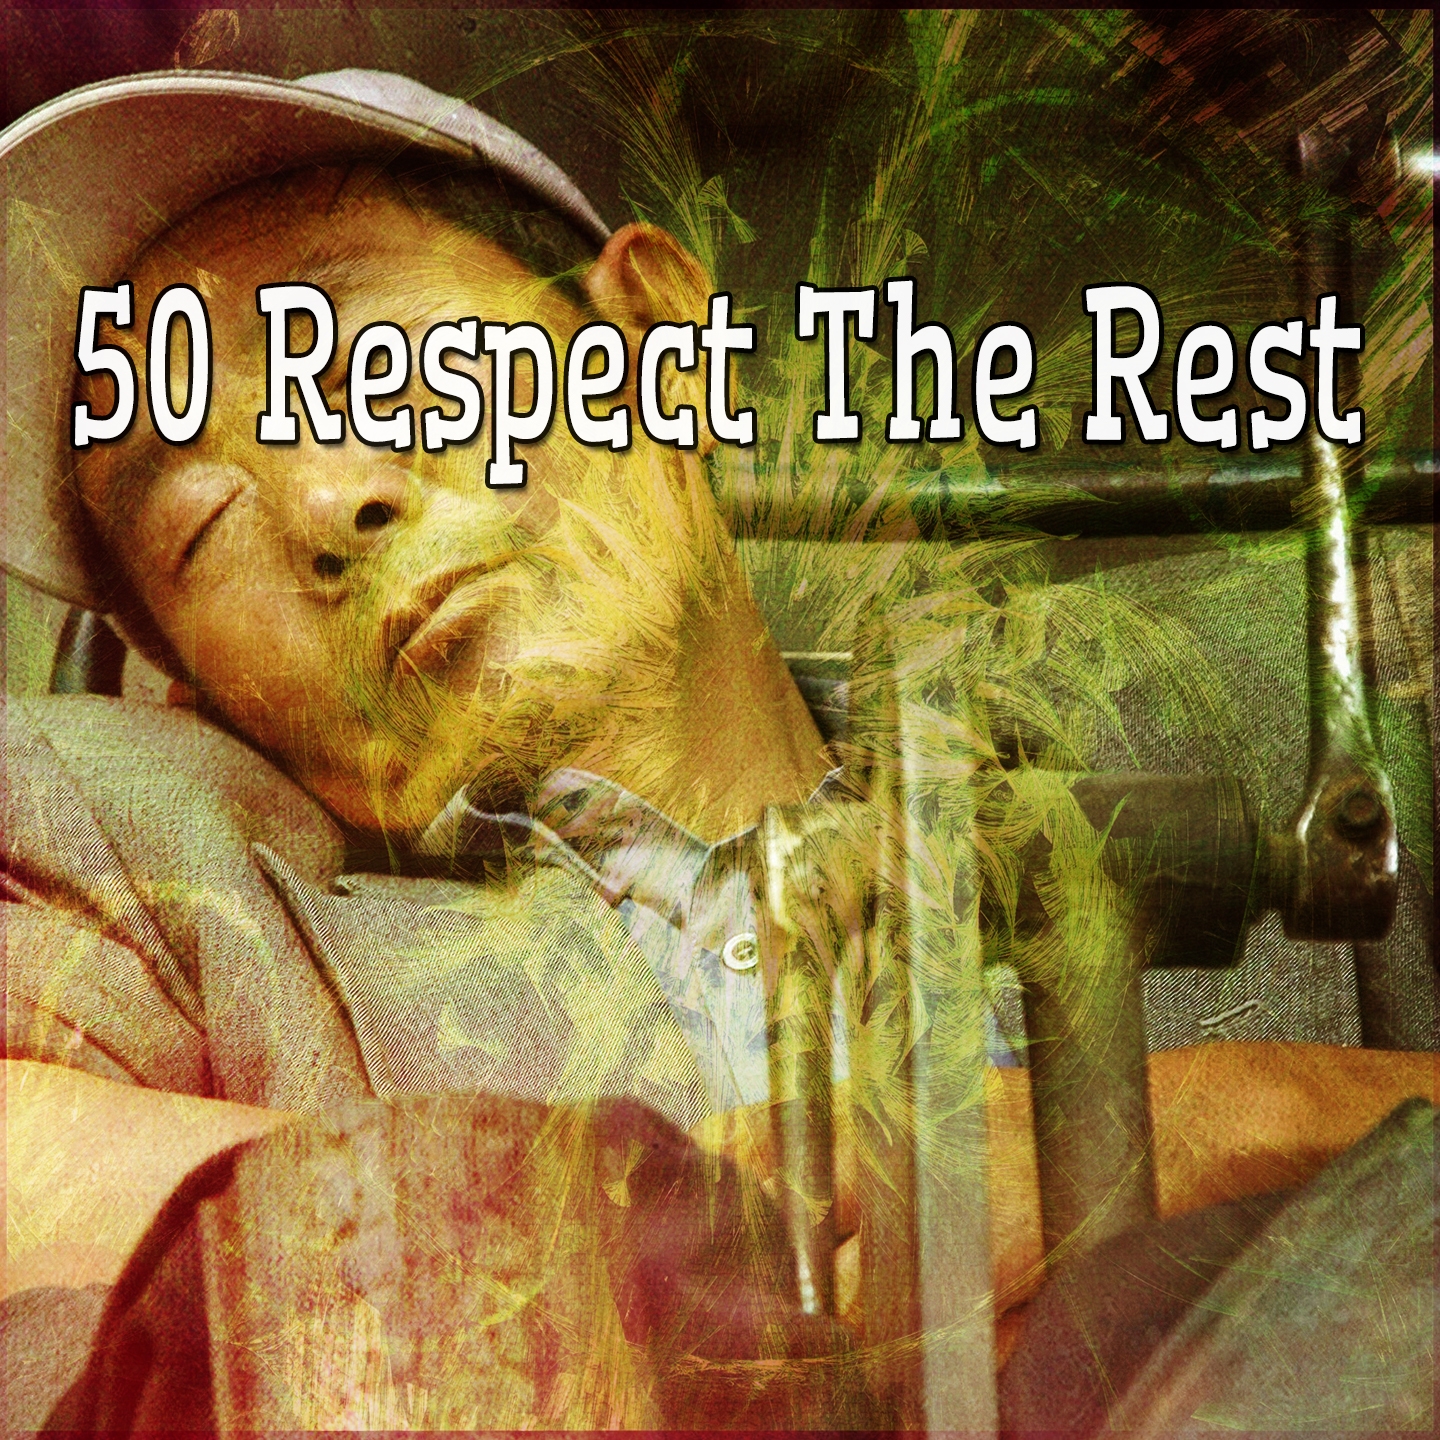 50 Respect The Rest